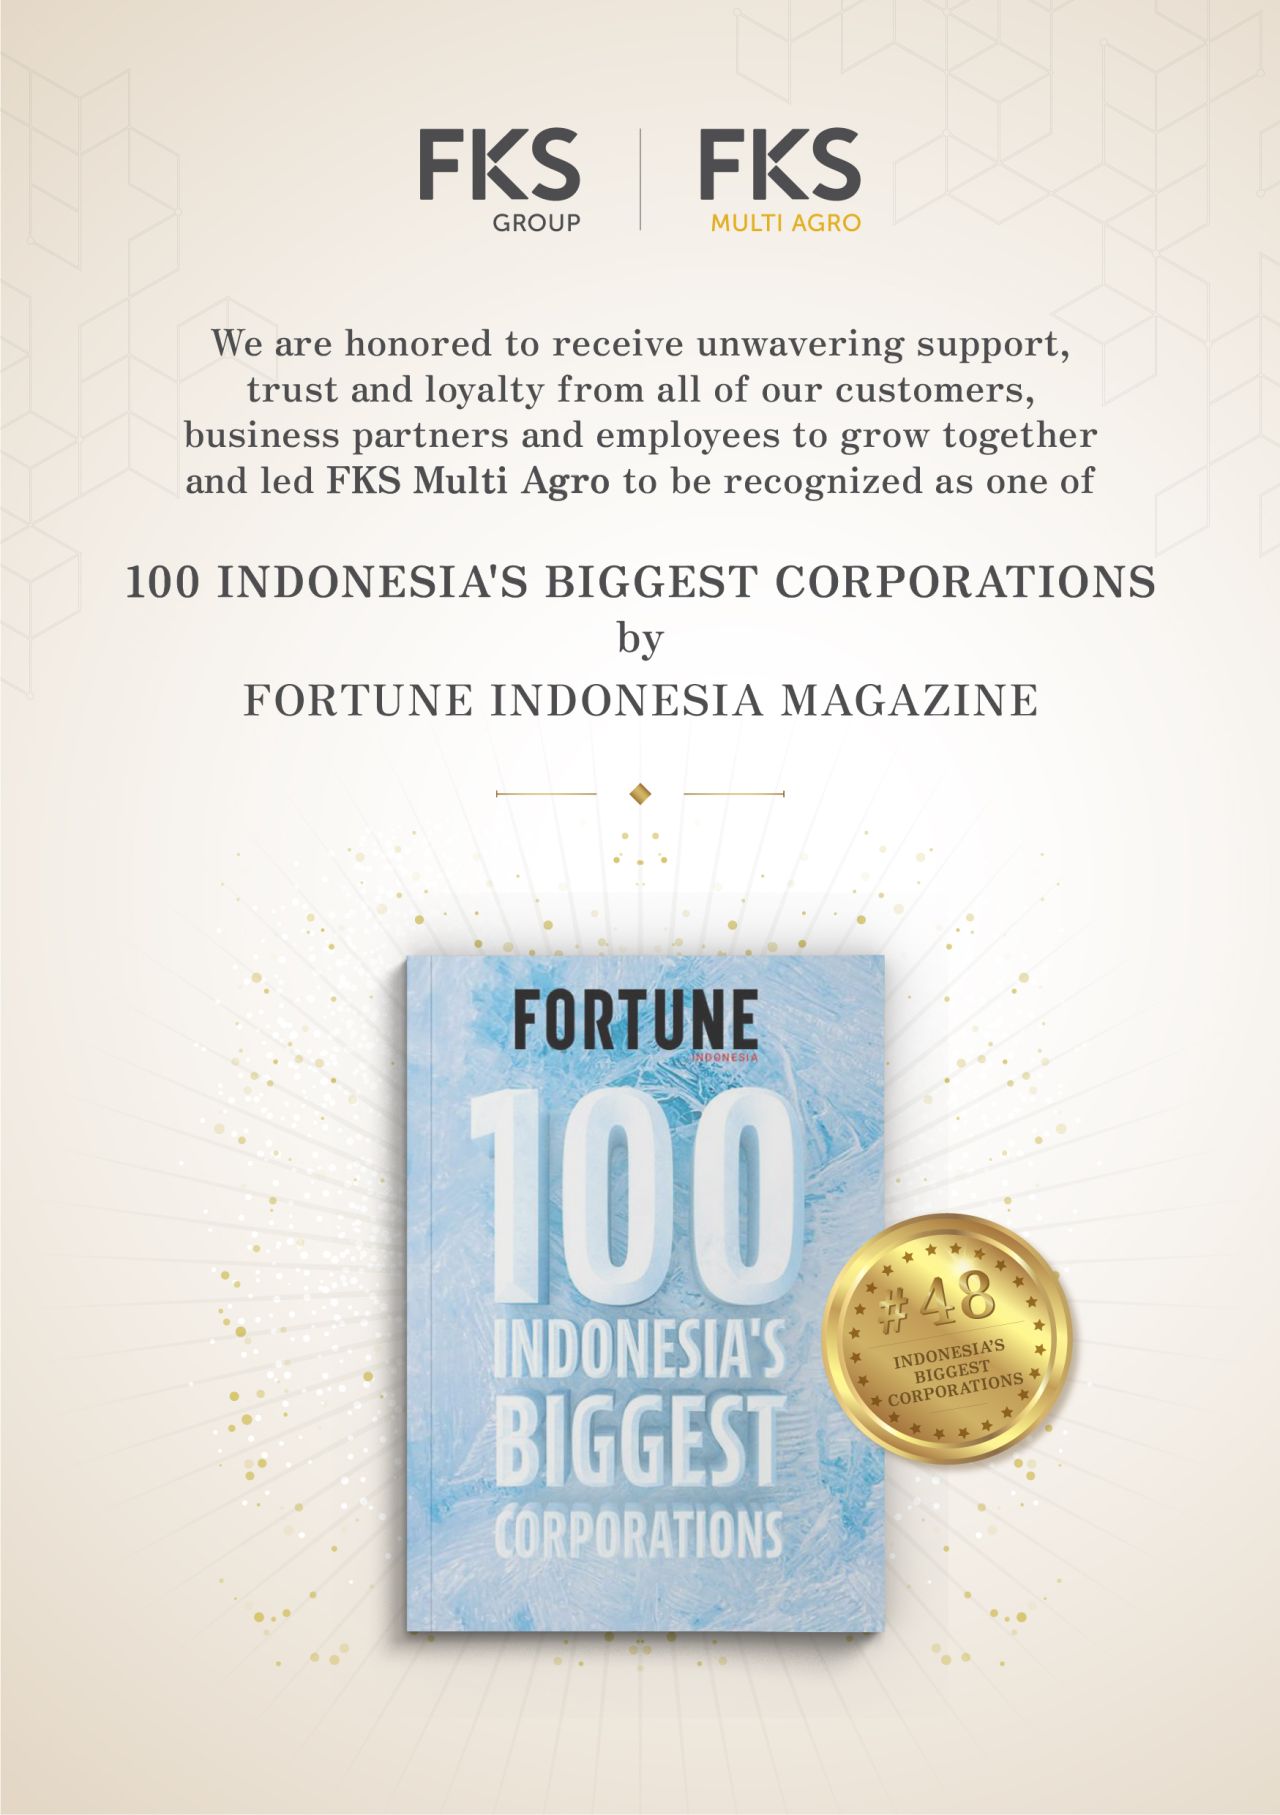 FKS Multi Agro Entered Fortune Indonesia Magazine as Rank 48 Out of 100